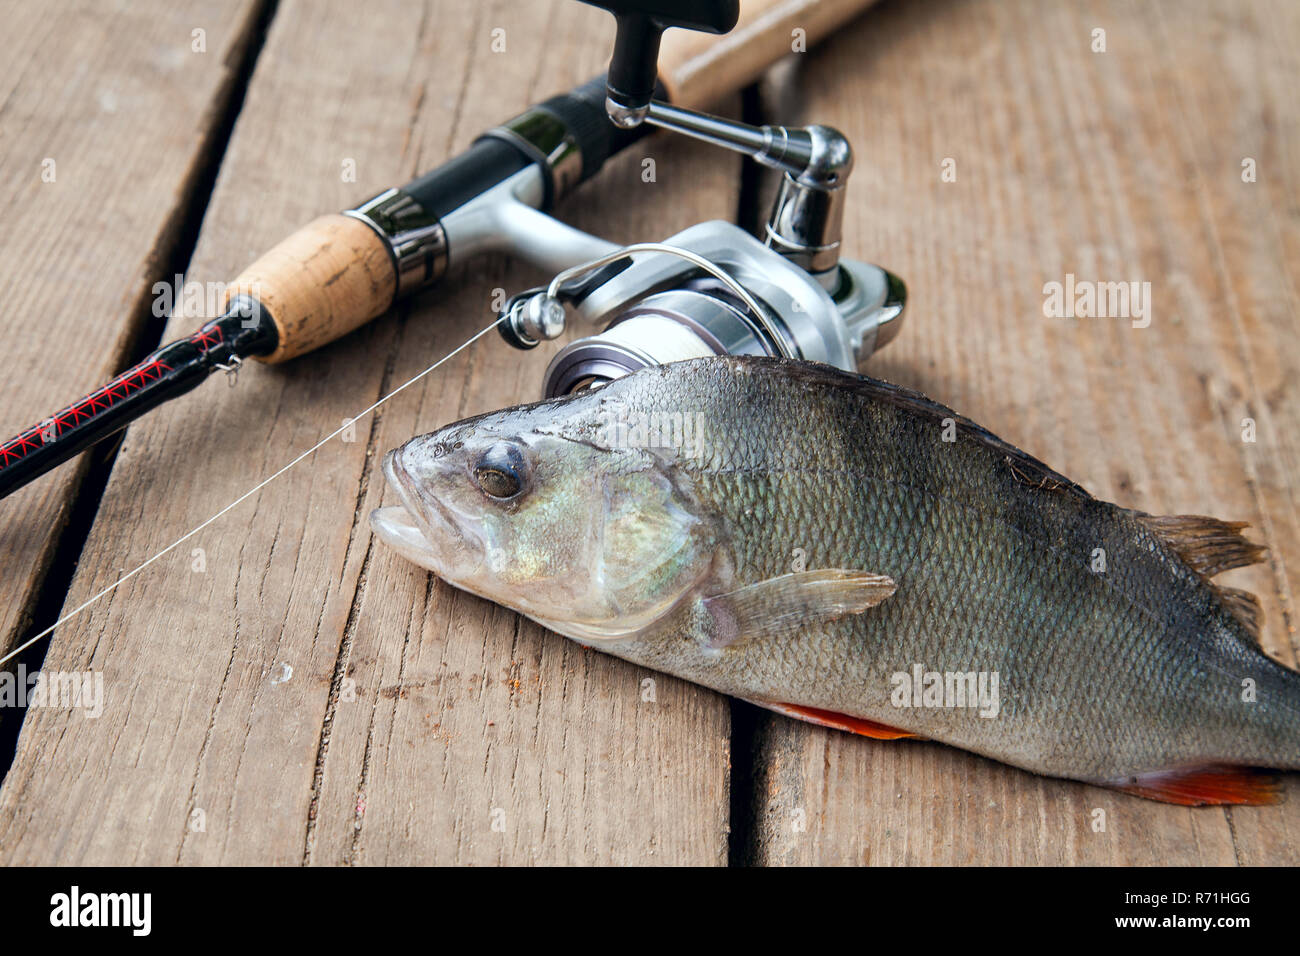 https://c8.alamy.com/comp/R71HGG/freshwater-perch-and-fishing-rod-with-reel-lying-on-vintage-wooden-background-fishing-concept-trophy-catch-big-freshwater-perch-fish-just-taken-fr-R71HGG.jpg